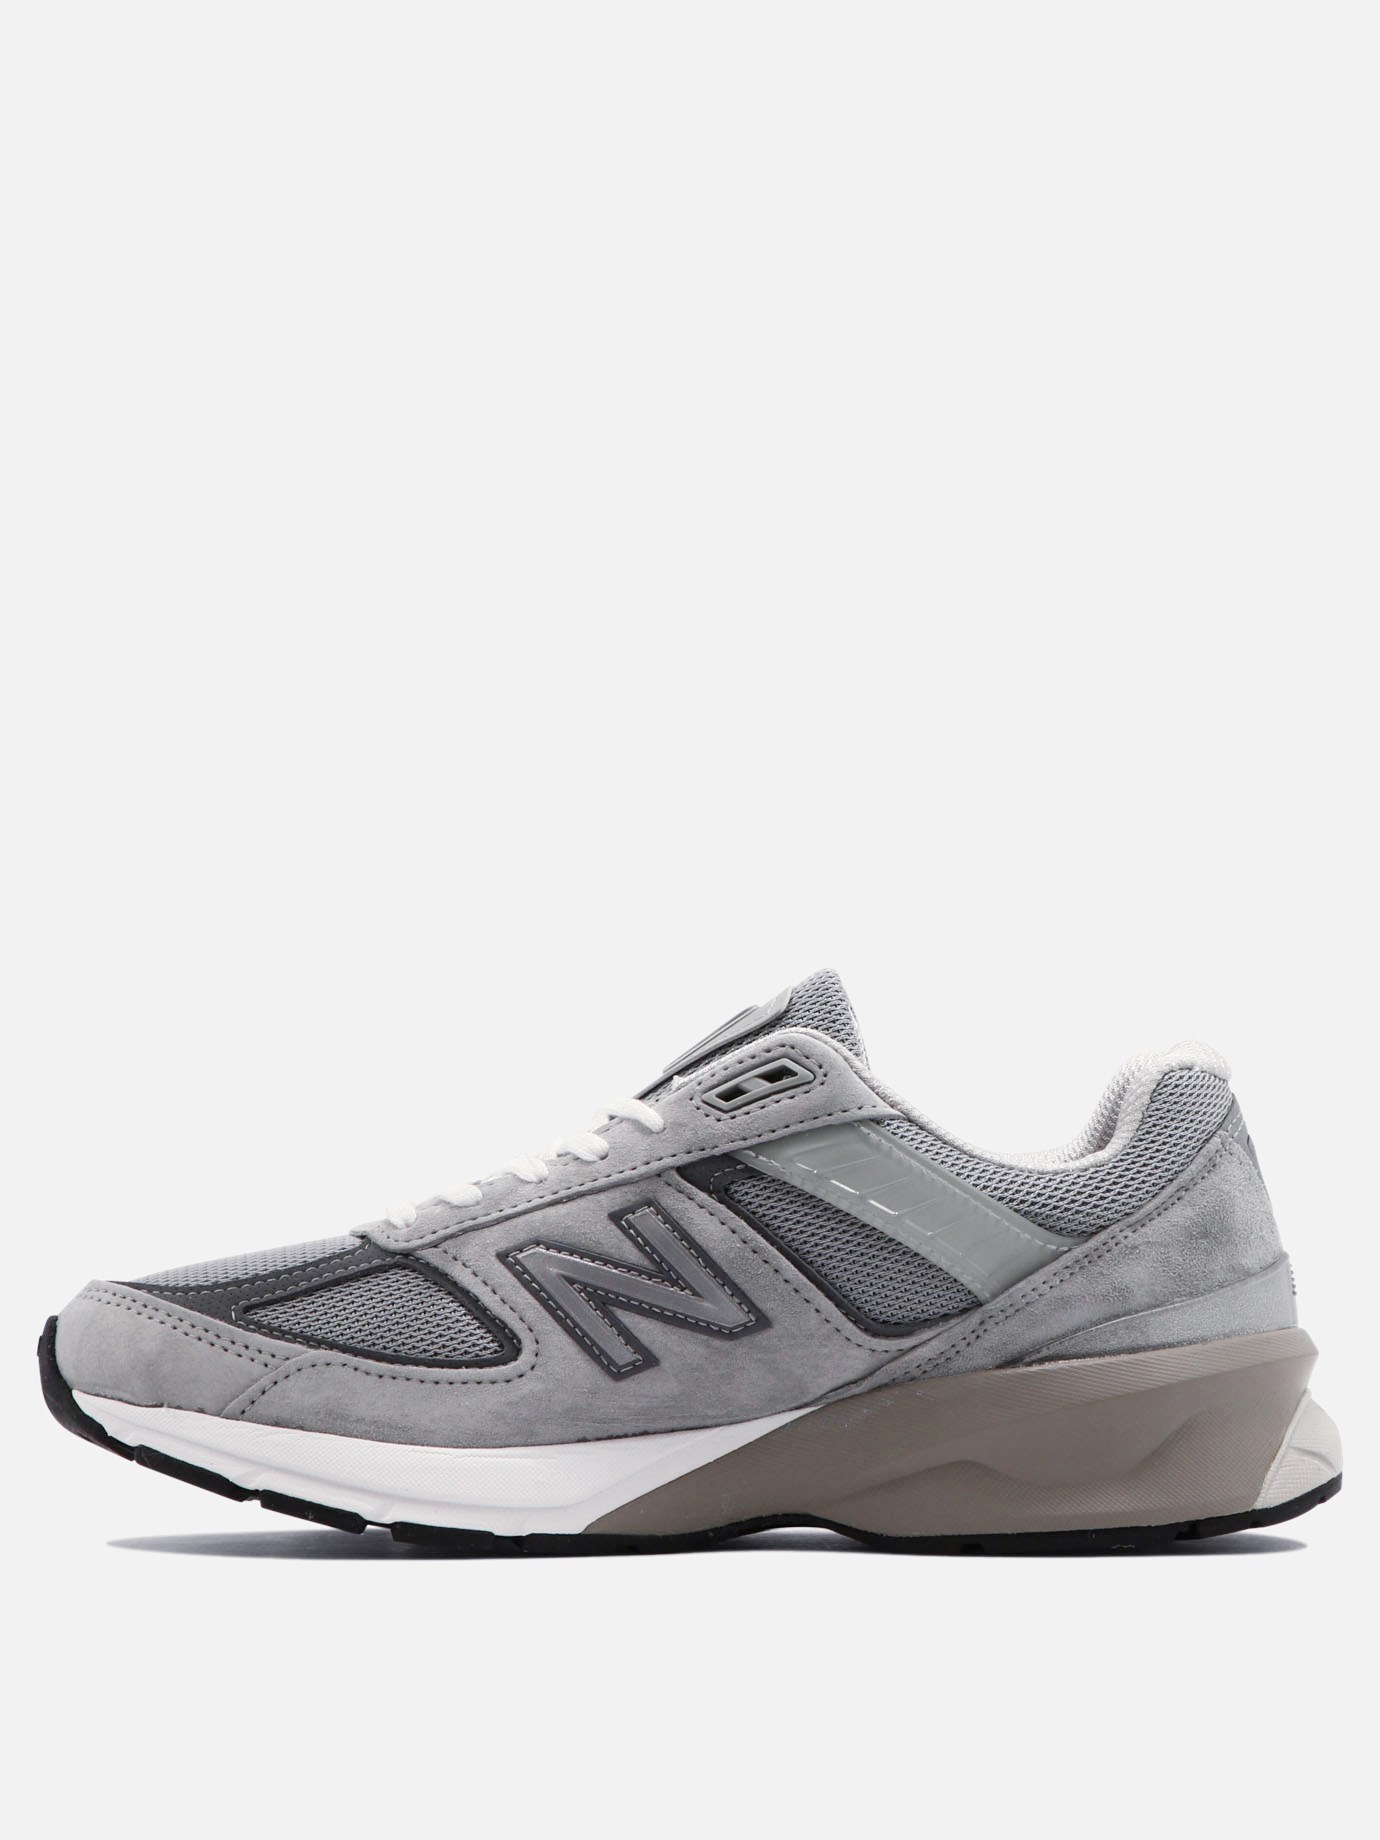  M990  sneakers by New Balance